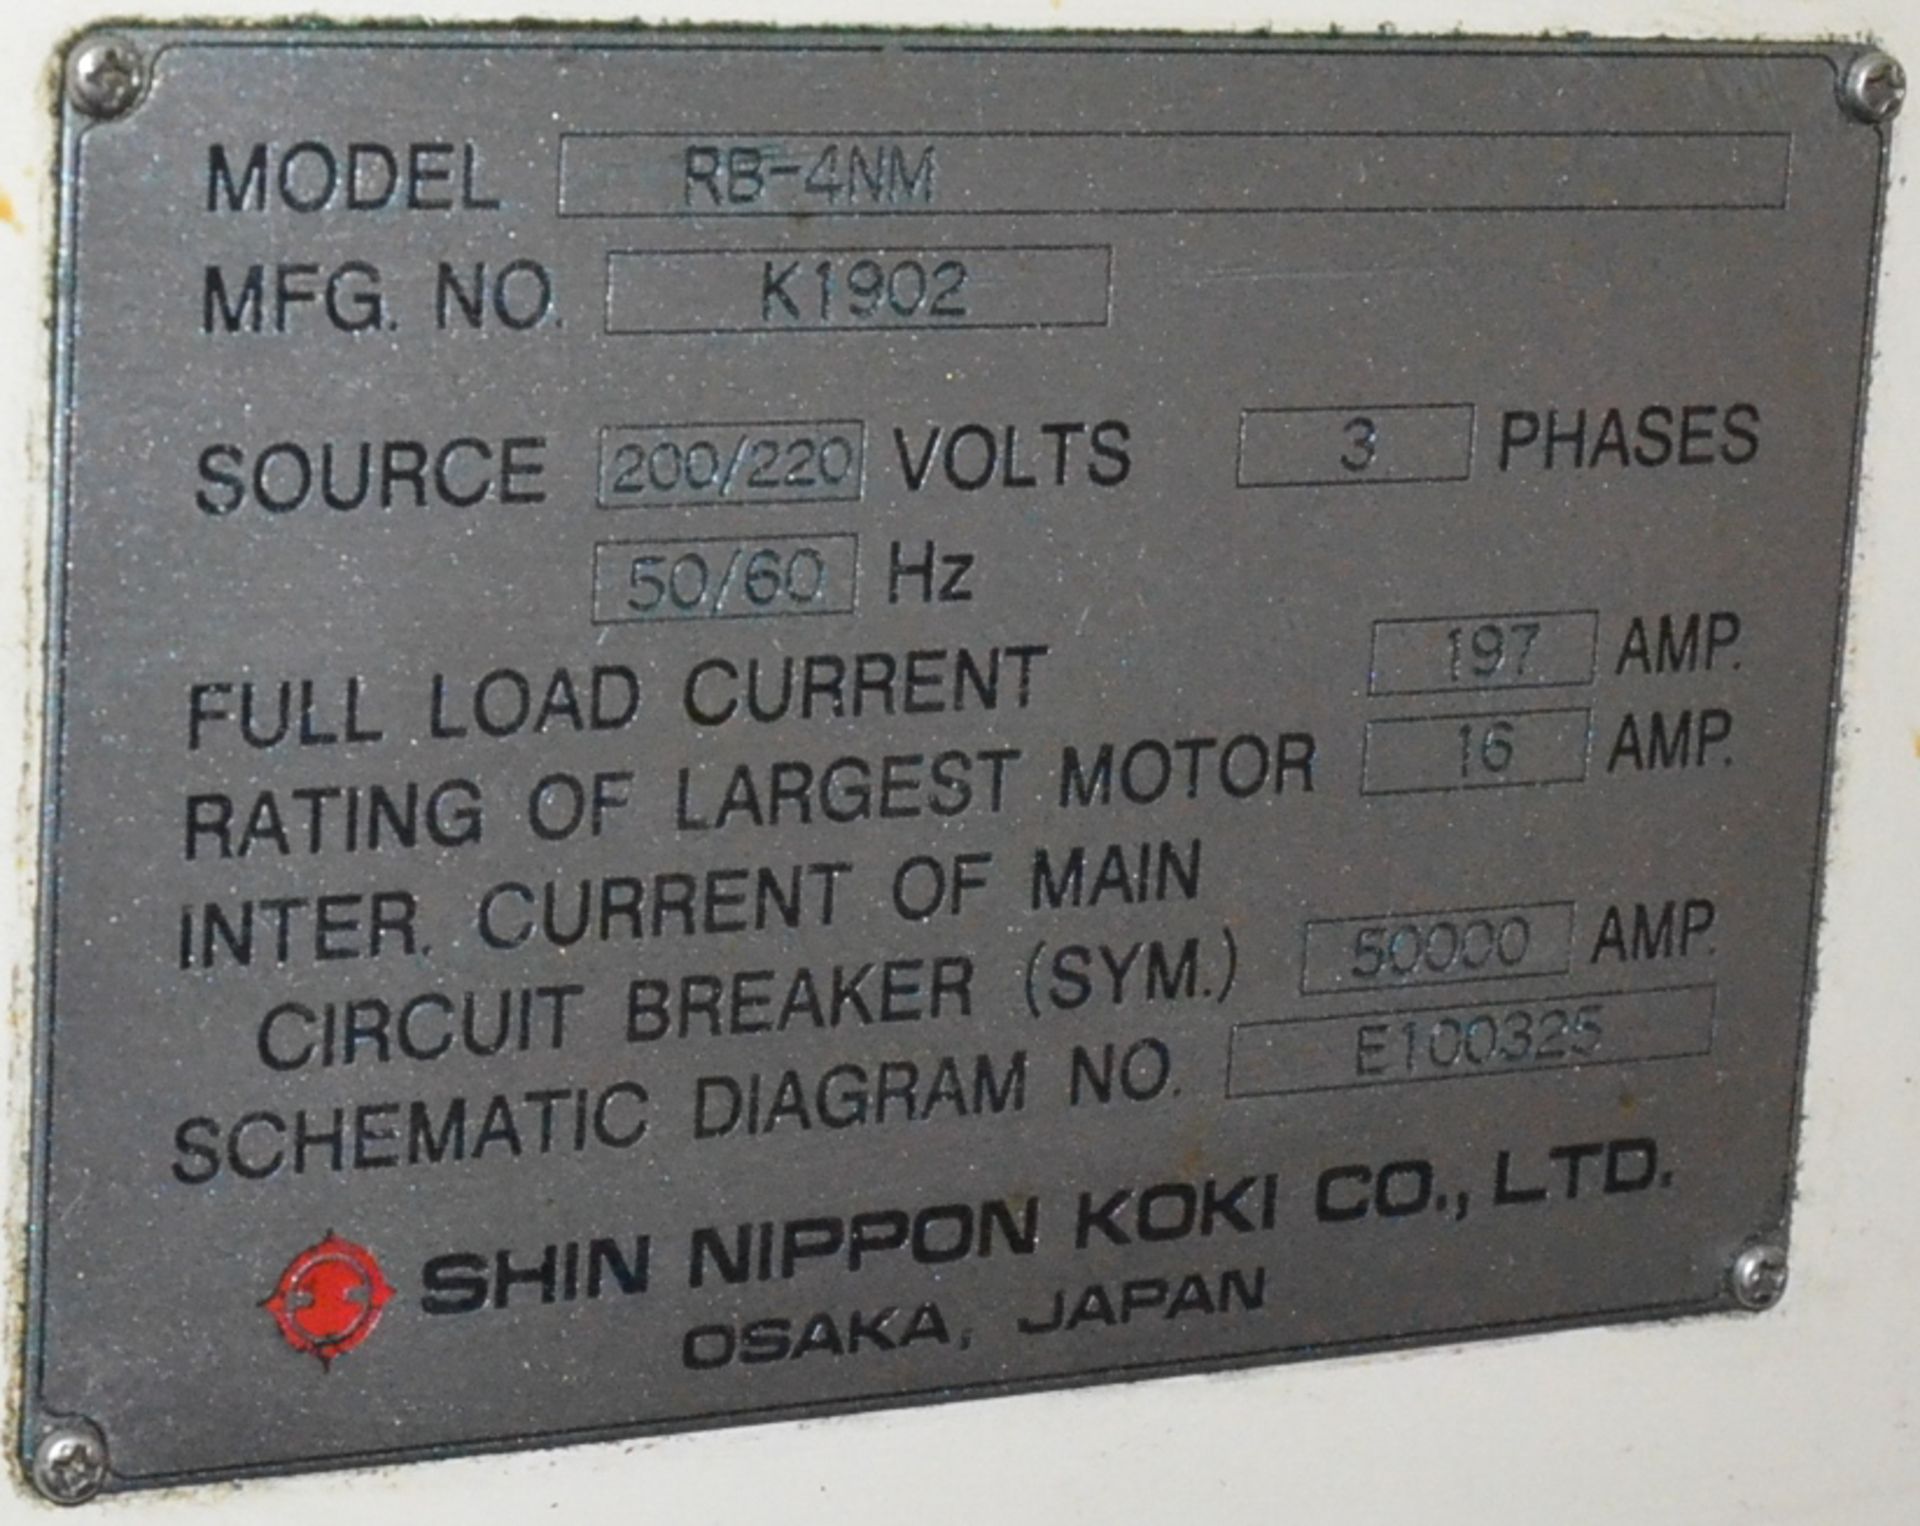 SNK RB-4NM DOUBLE COLUMN CNC VERTICAL MACHINING CENTER WITH FANUC 18-M CNC CONTROL, 236” X 78” - Image 9 of 12